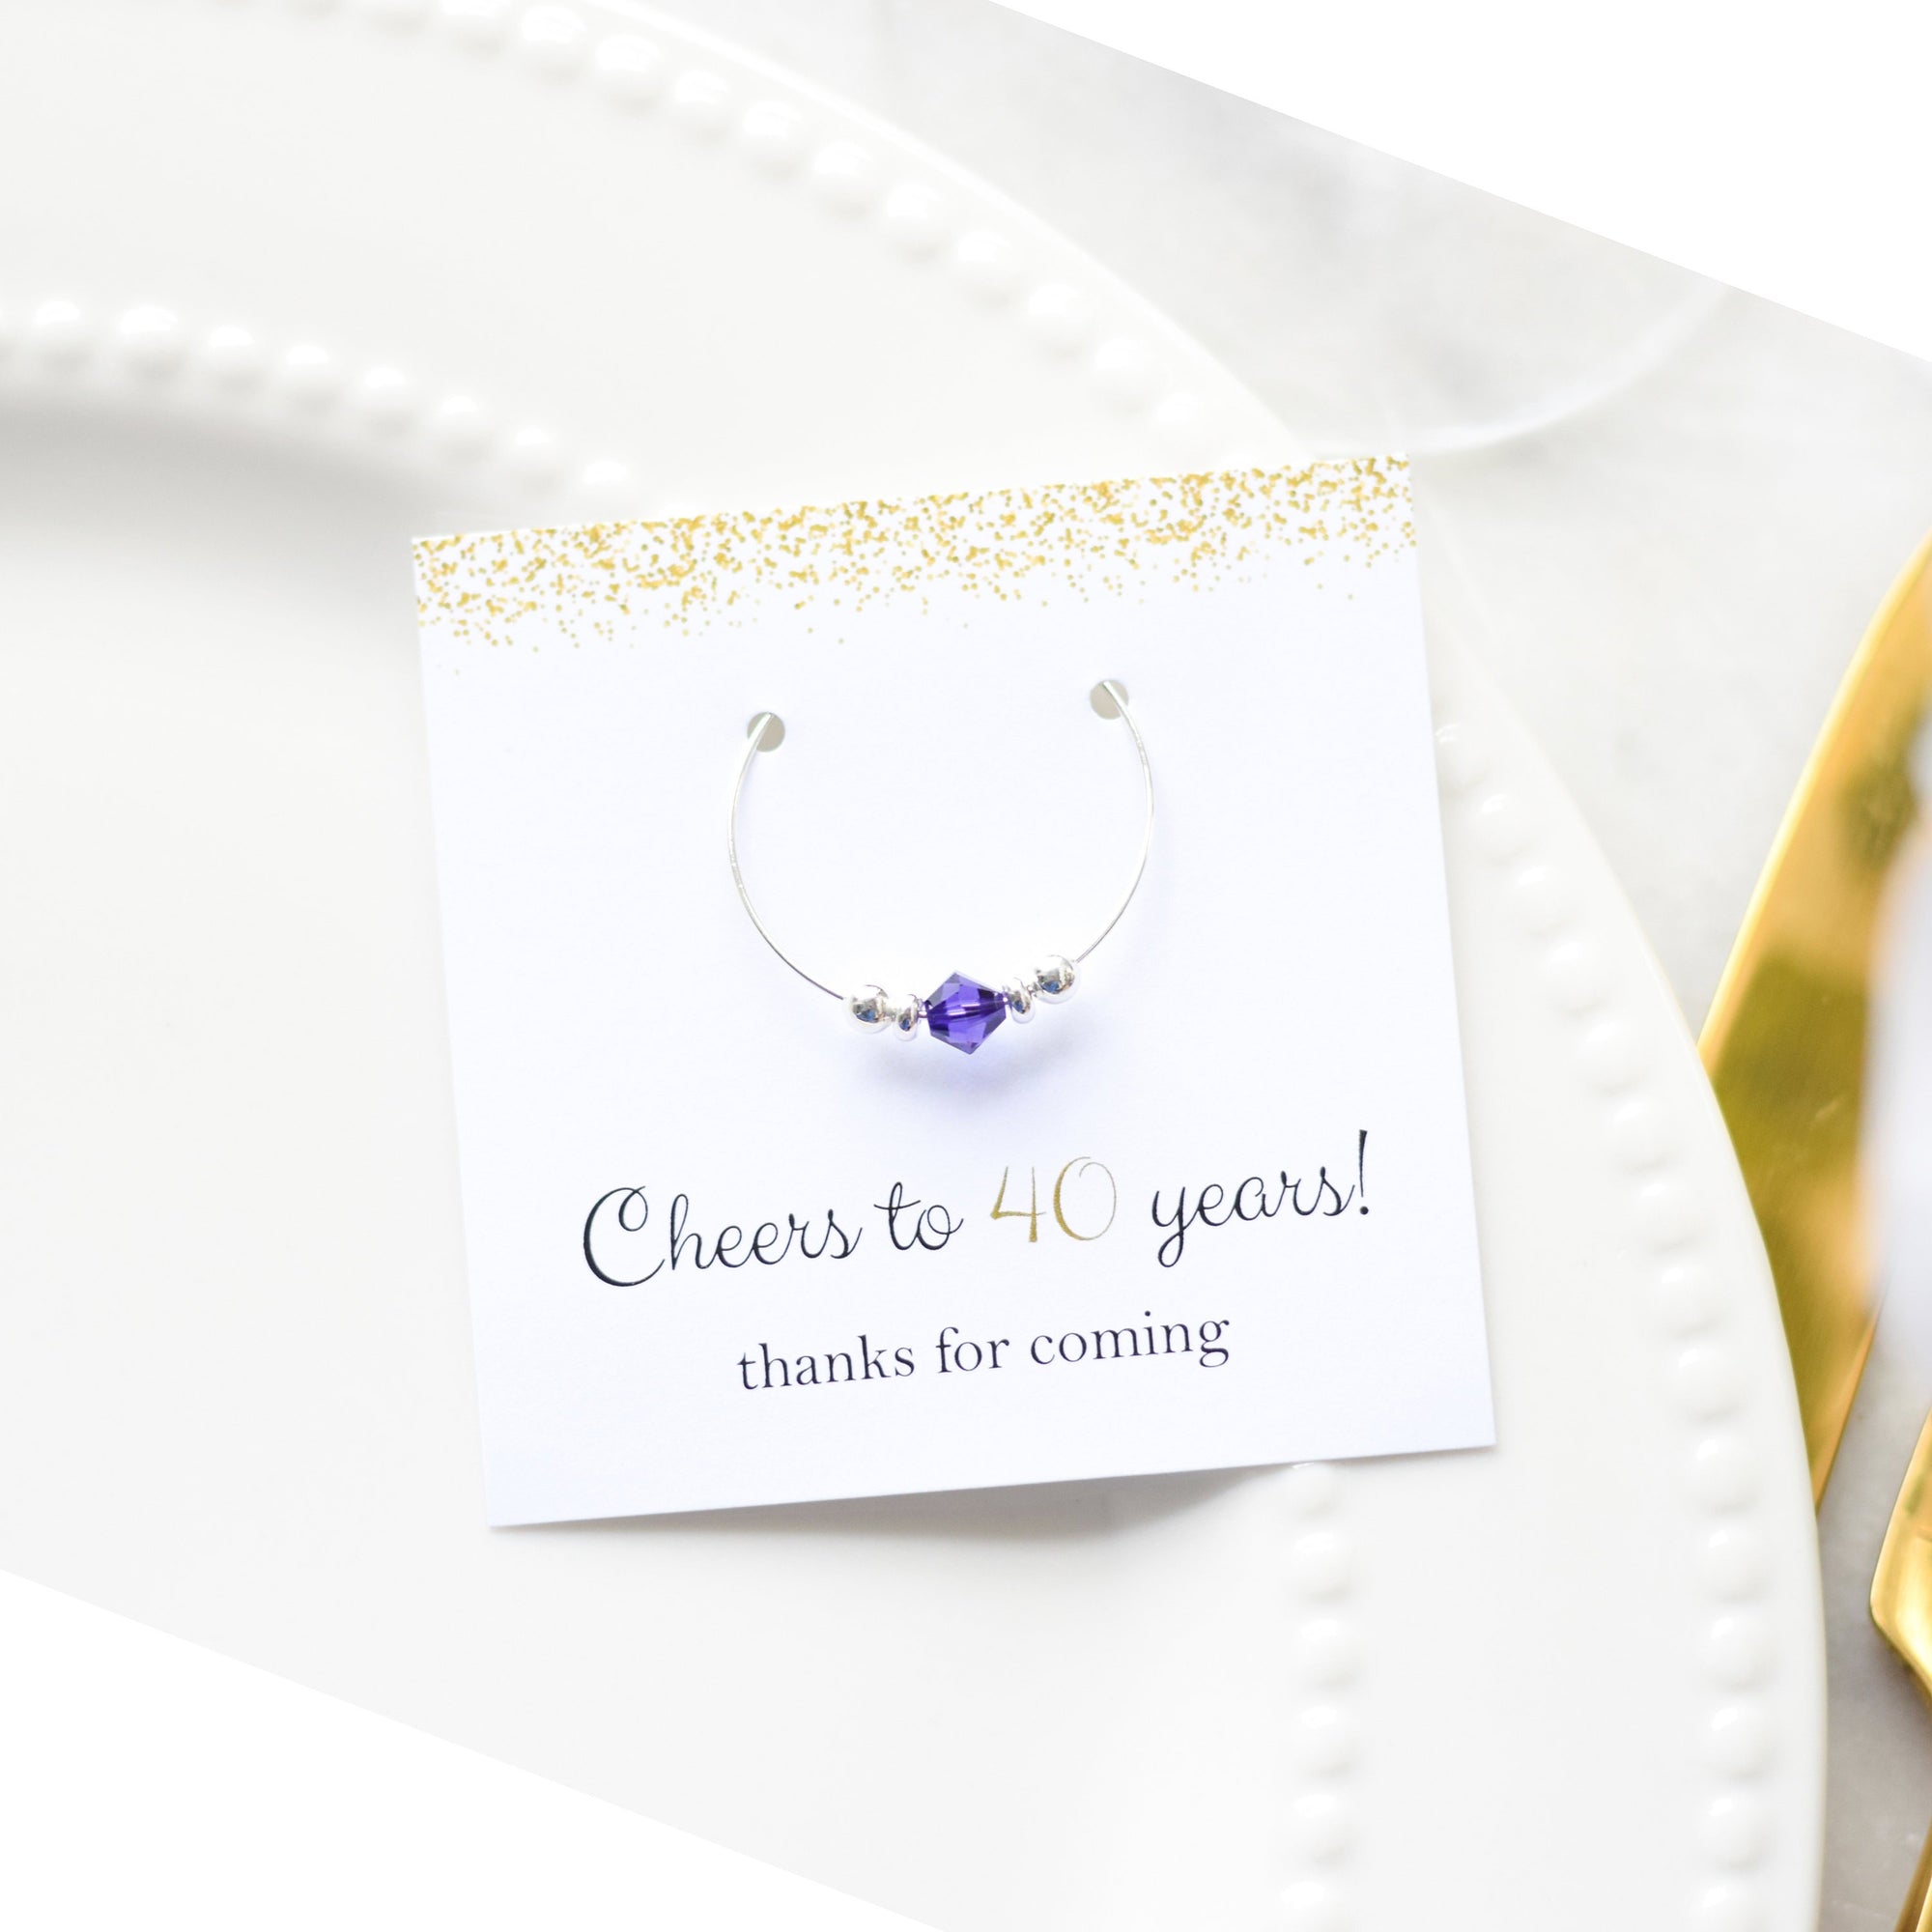 40th Birthday Party Favors, Cheers to 40 Years, 40th Birthday Favor for Woman, 40th Birthday Supplies, Swarovski Crystal Wine Charm Favors - @PlumPolkaDot 